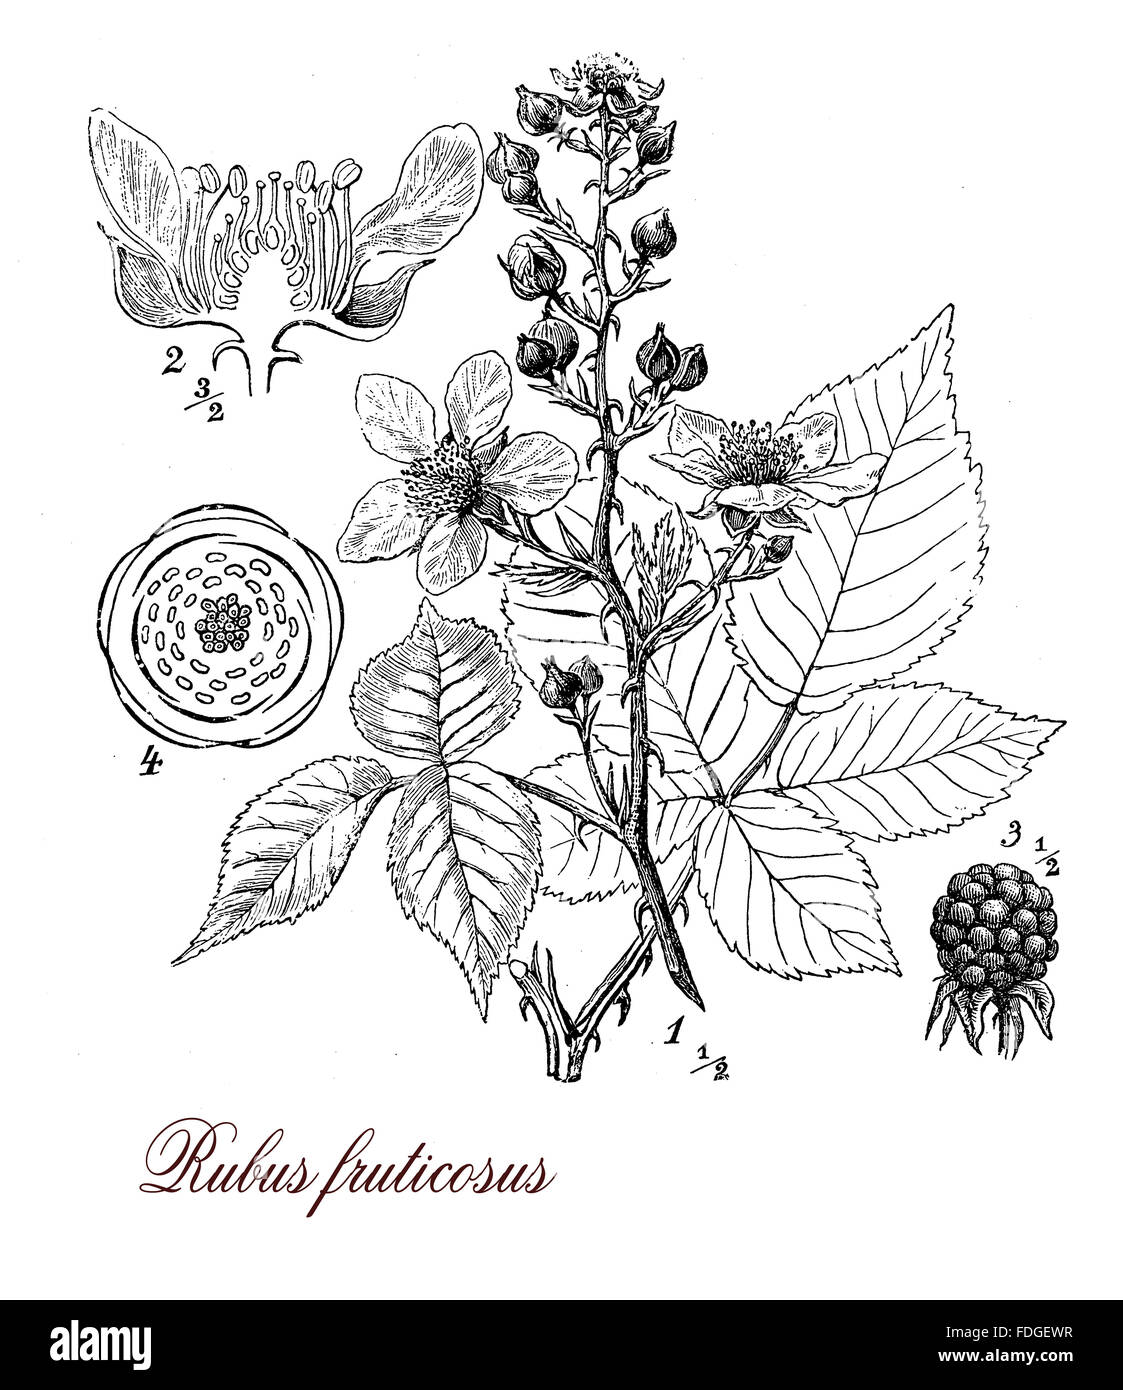 Vintage print describing the blackberry perennial plant morphology:palmated leaves,very sharp prickles, flowers and fruits (berries), grows also in poor soil. Stock Photo